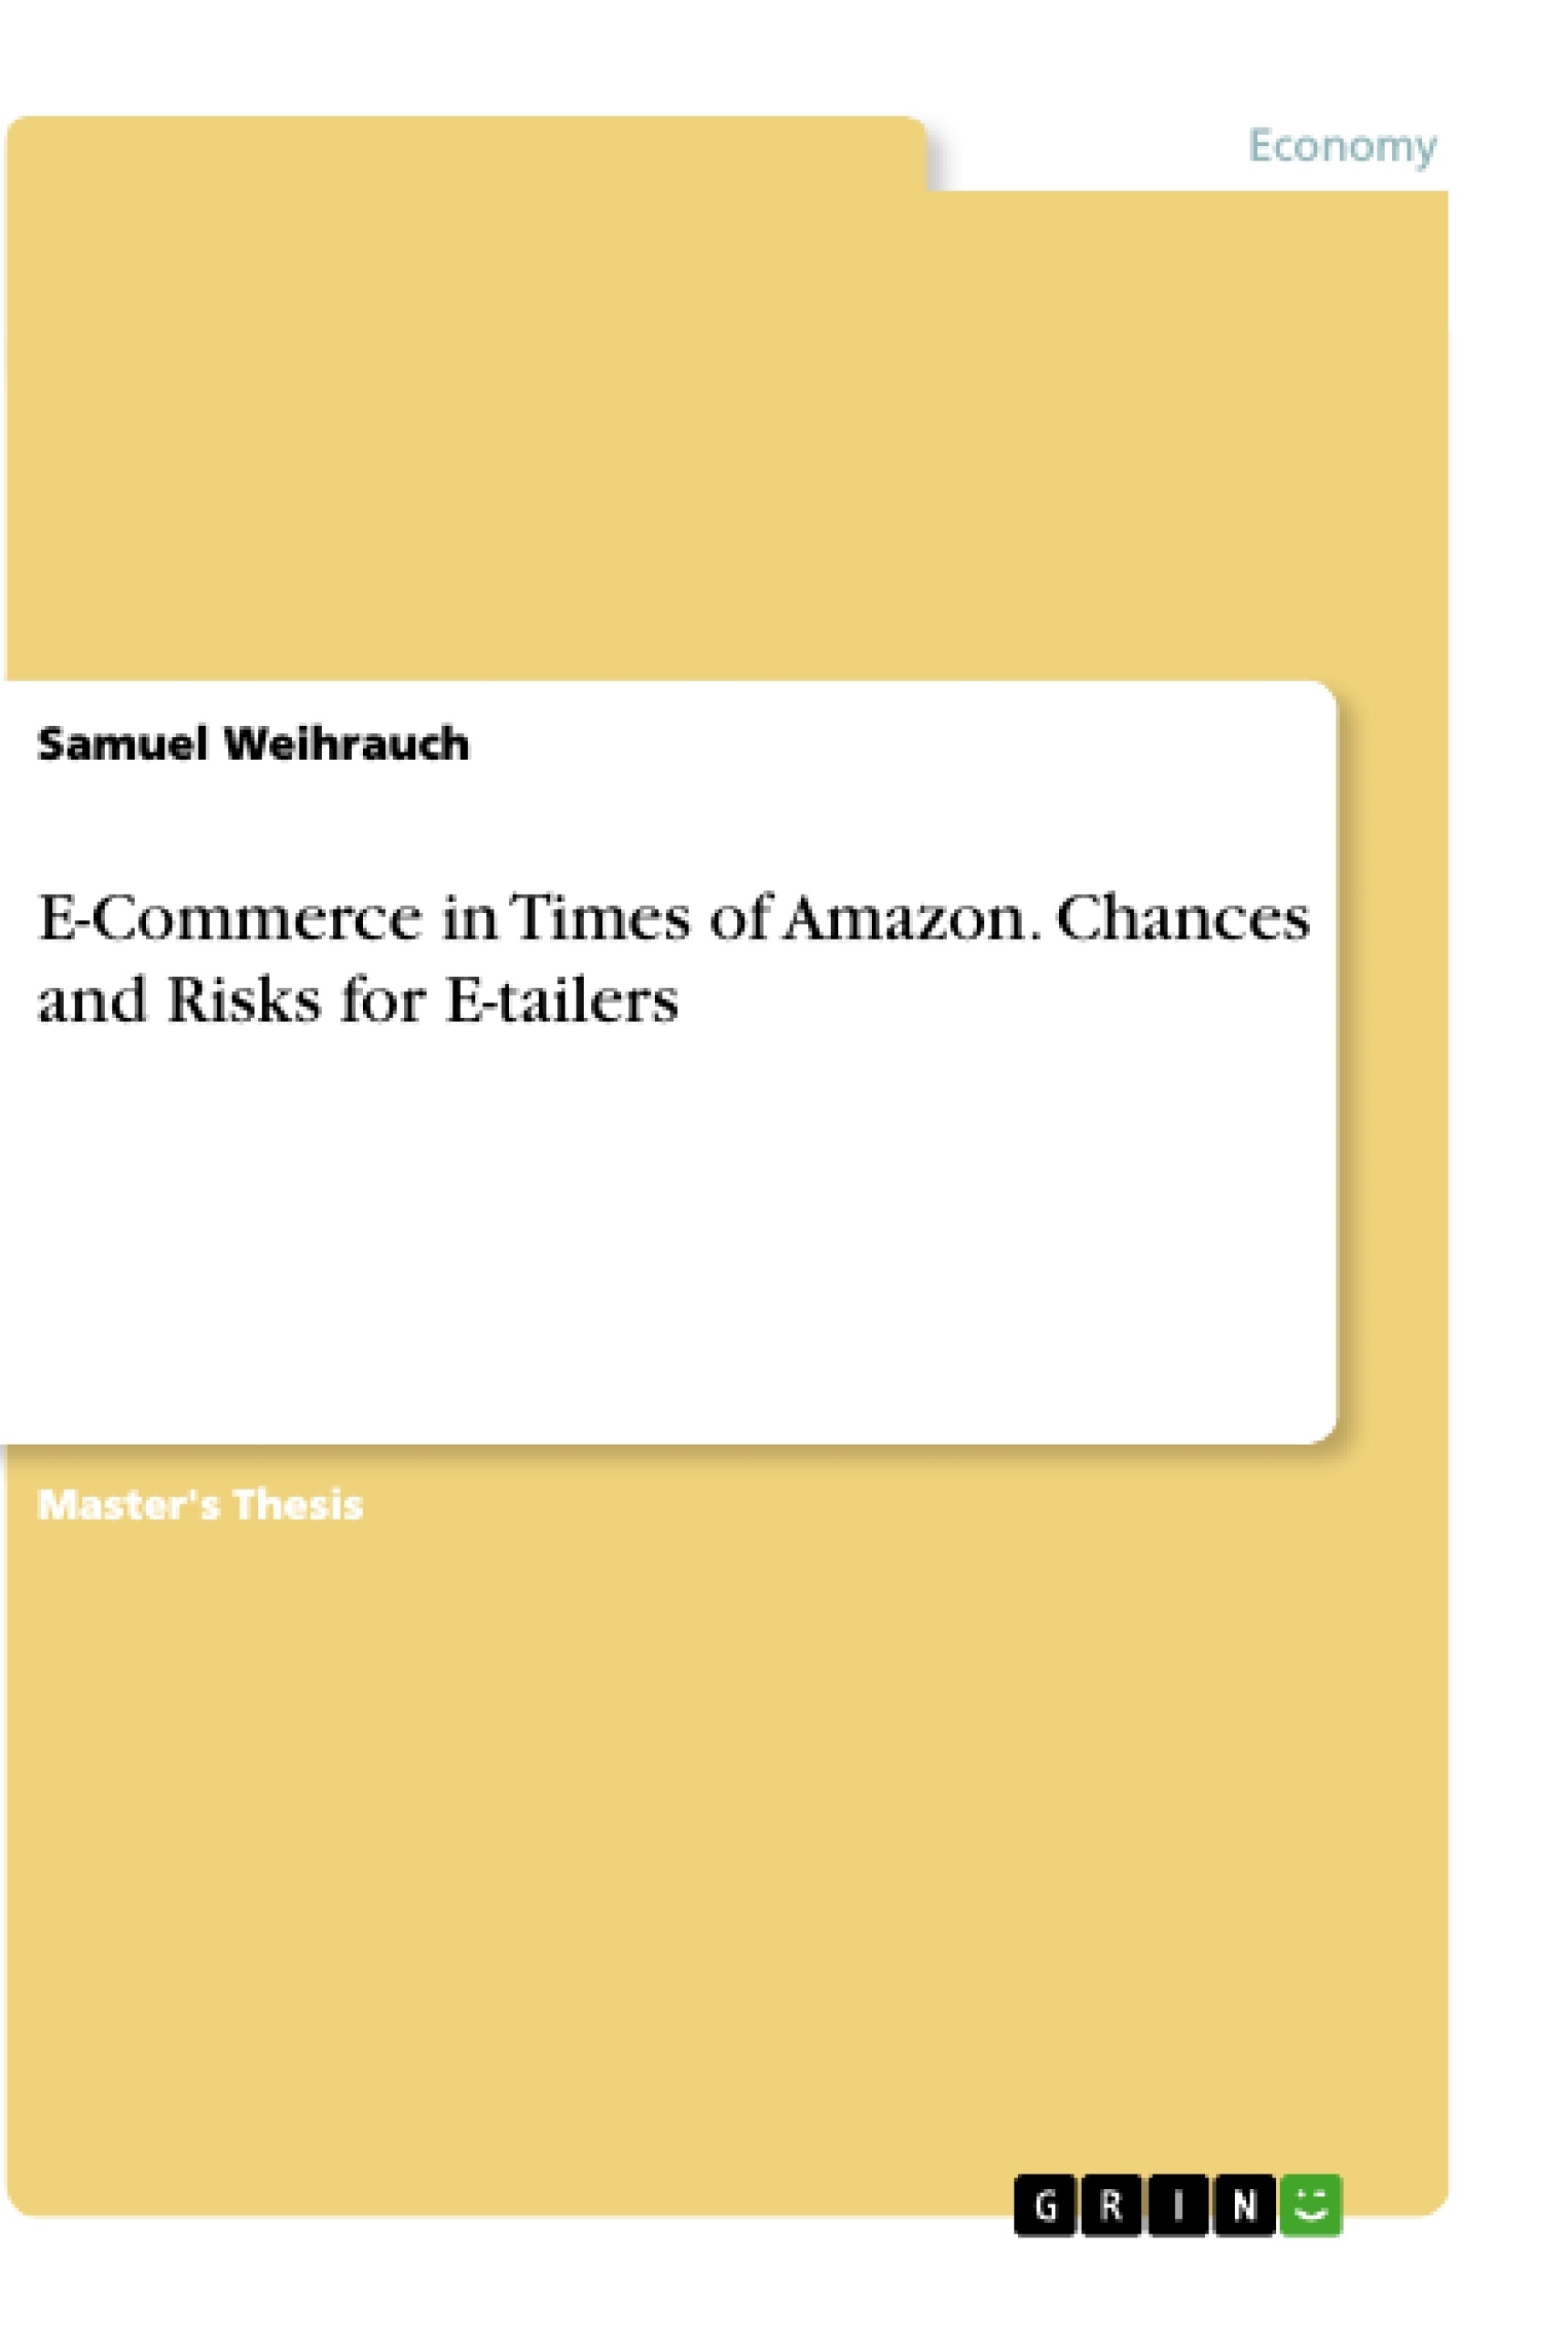 Title: E-Commerce in Times of Amazon. Chances and Risks for E-tailers